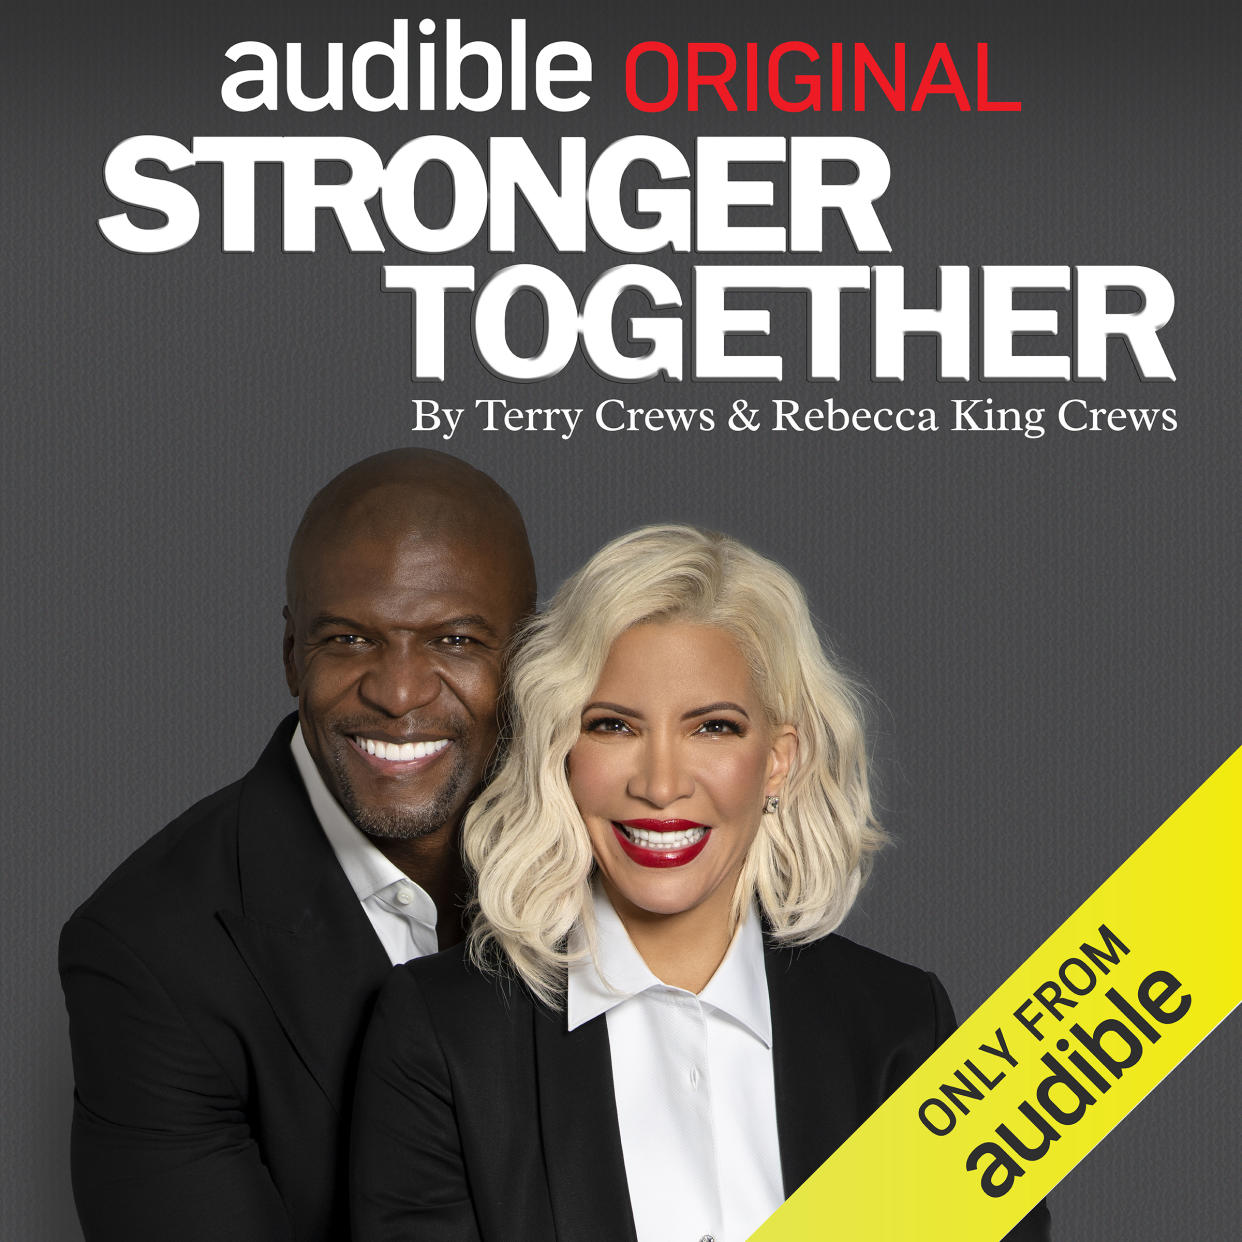 The couple get frank about reaffirming their relationship after a rocky patch in their new Audible audio memoir. (Photo: Courtesy of Audible)